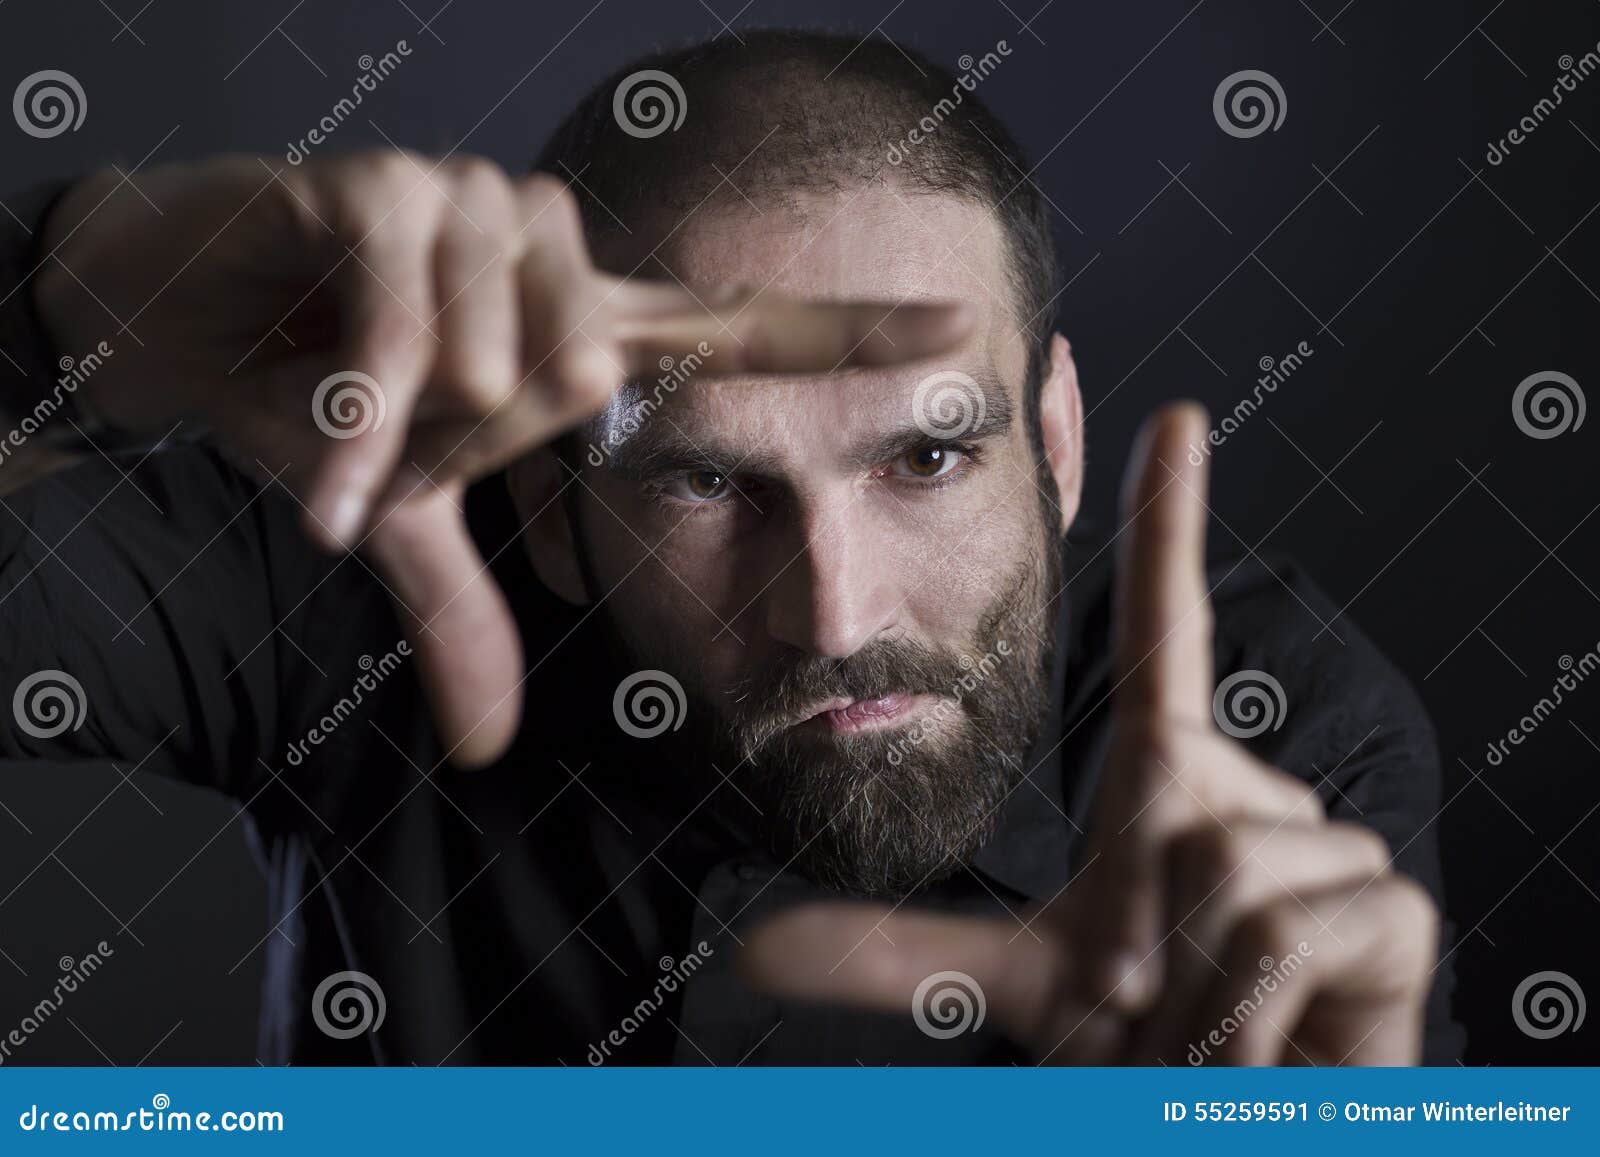 focused man building frame with fingers.